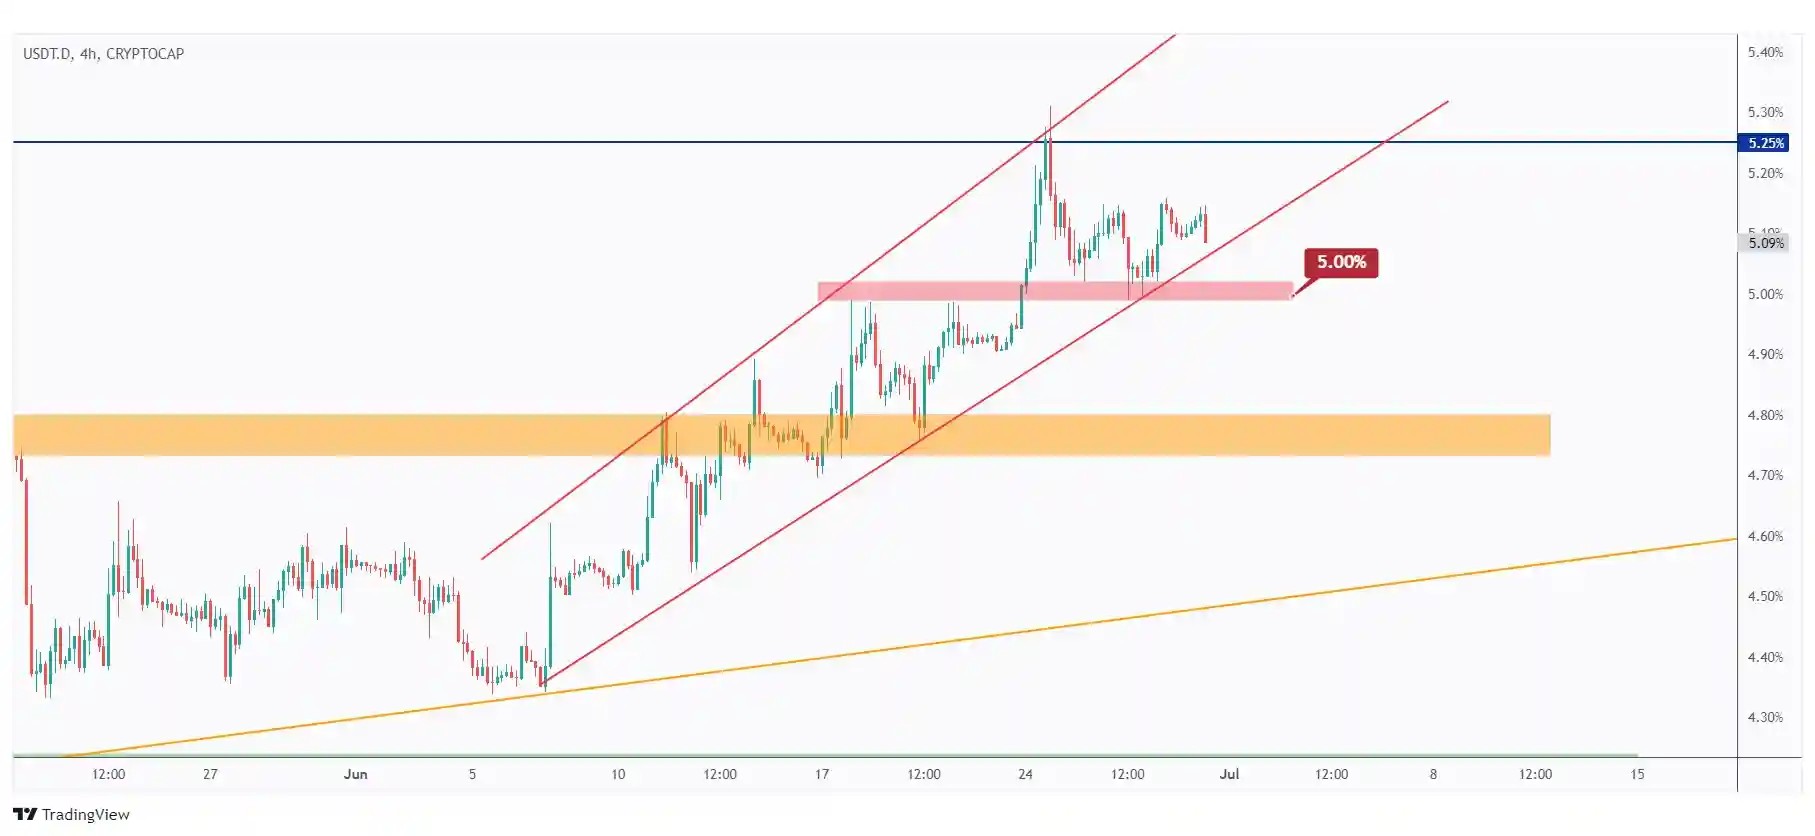 USDT.D 4H chart overall bullish trading within a rising range as long as the last low at 5% holds.